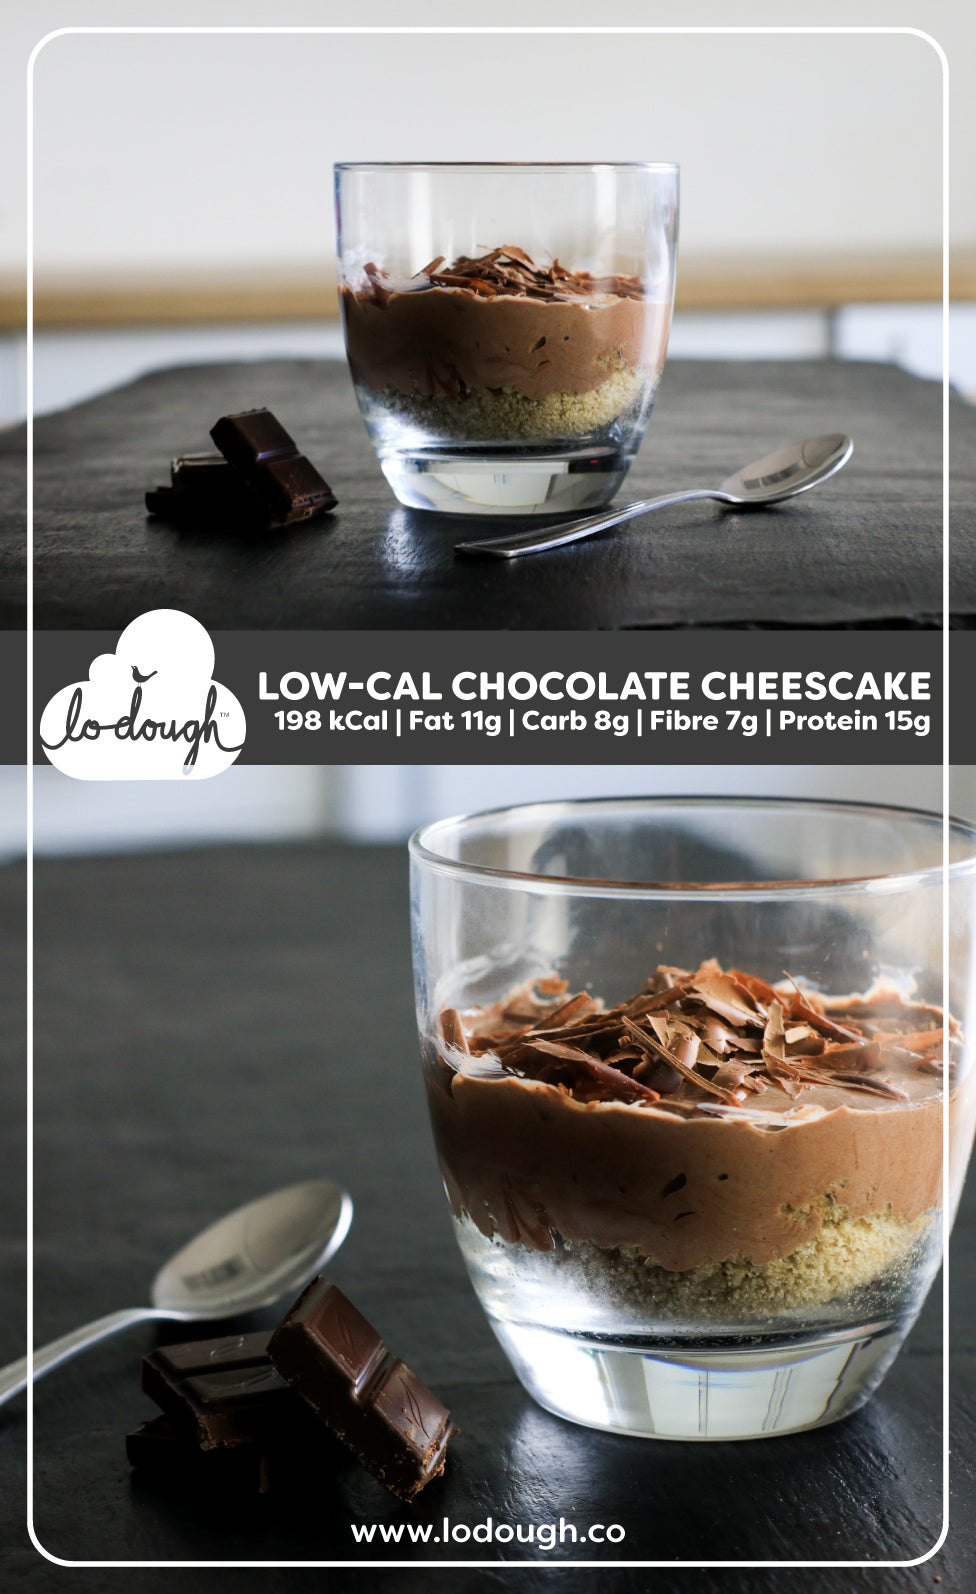 Low-Calorie Chocolate Cheesecake 